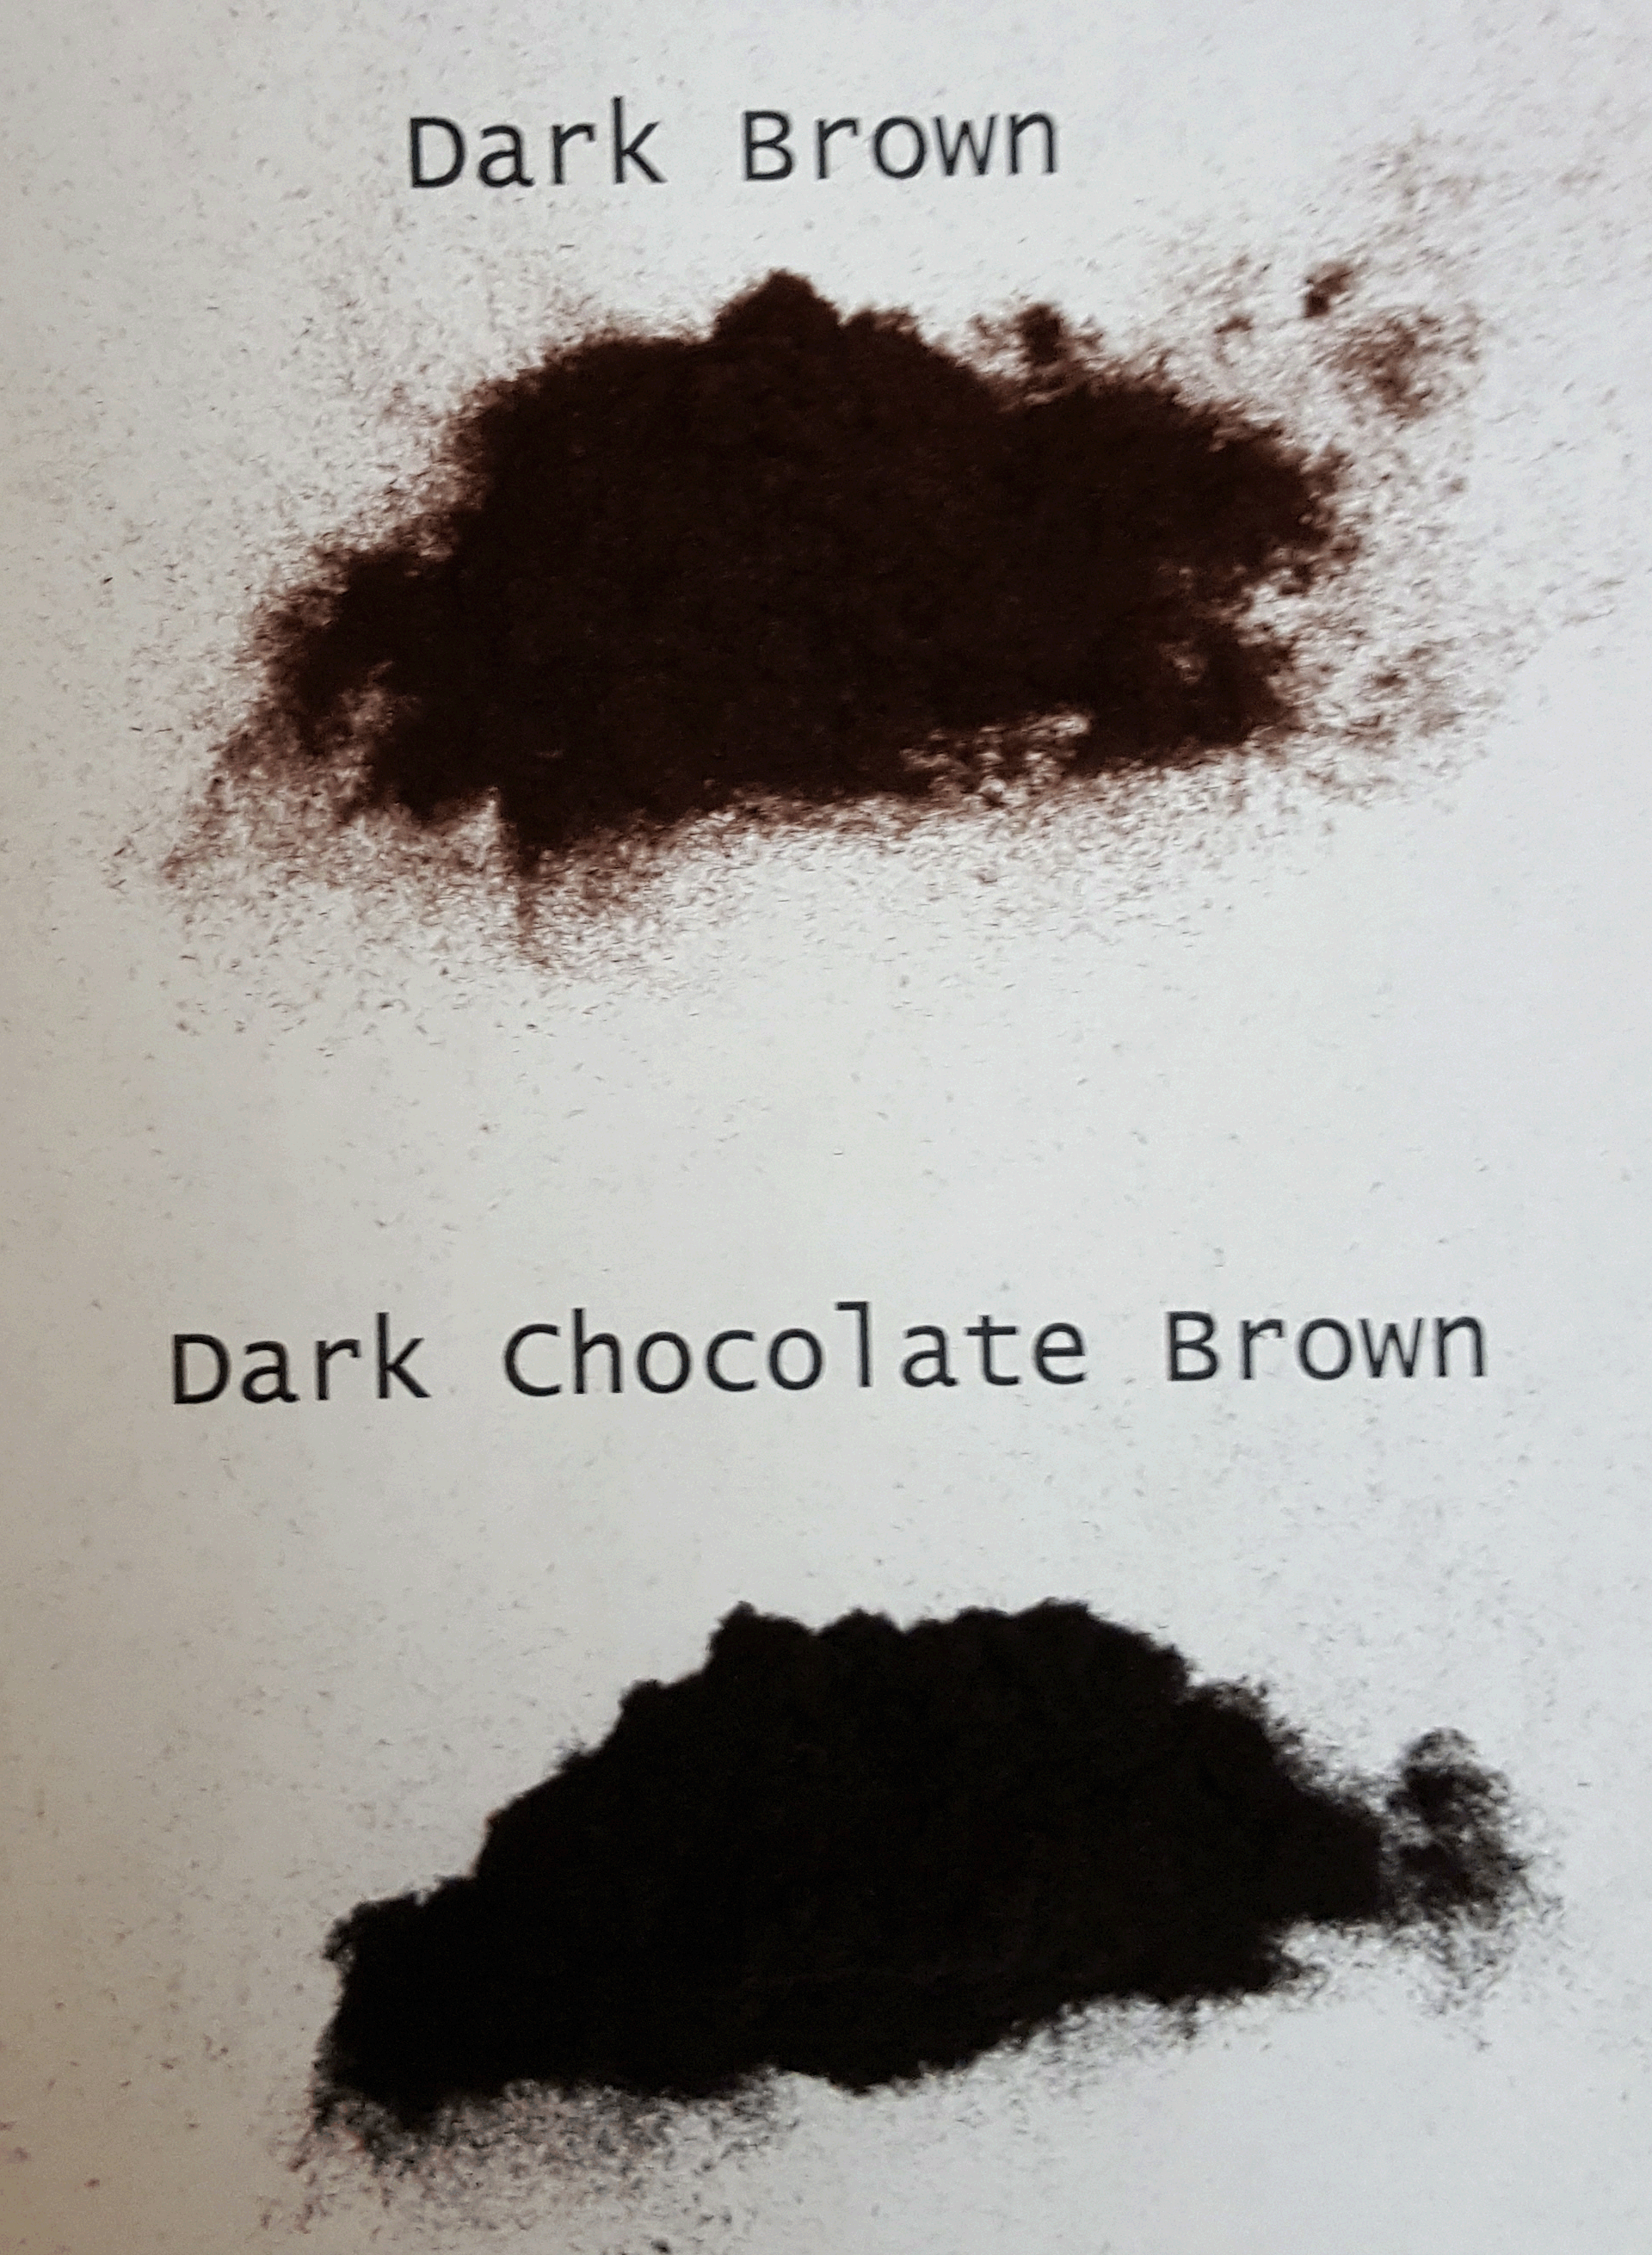 difference between dark brown and dark chocolate brown